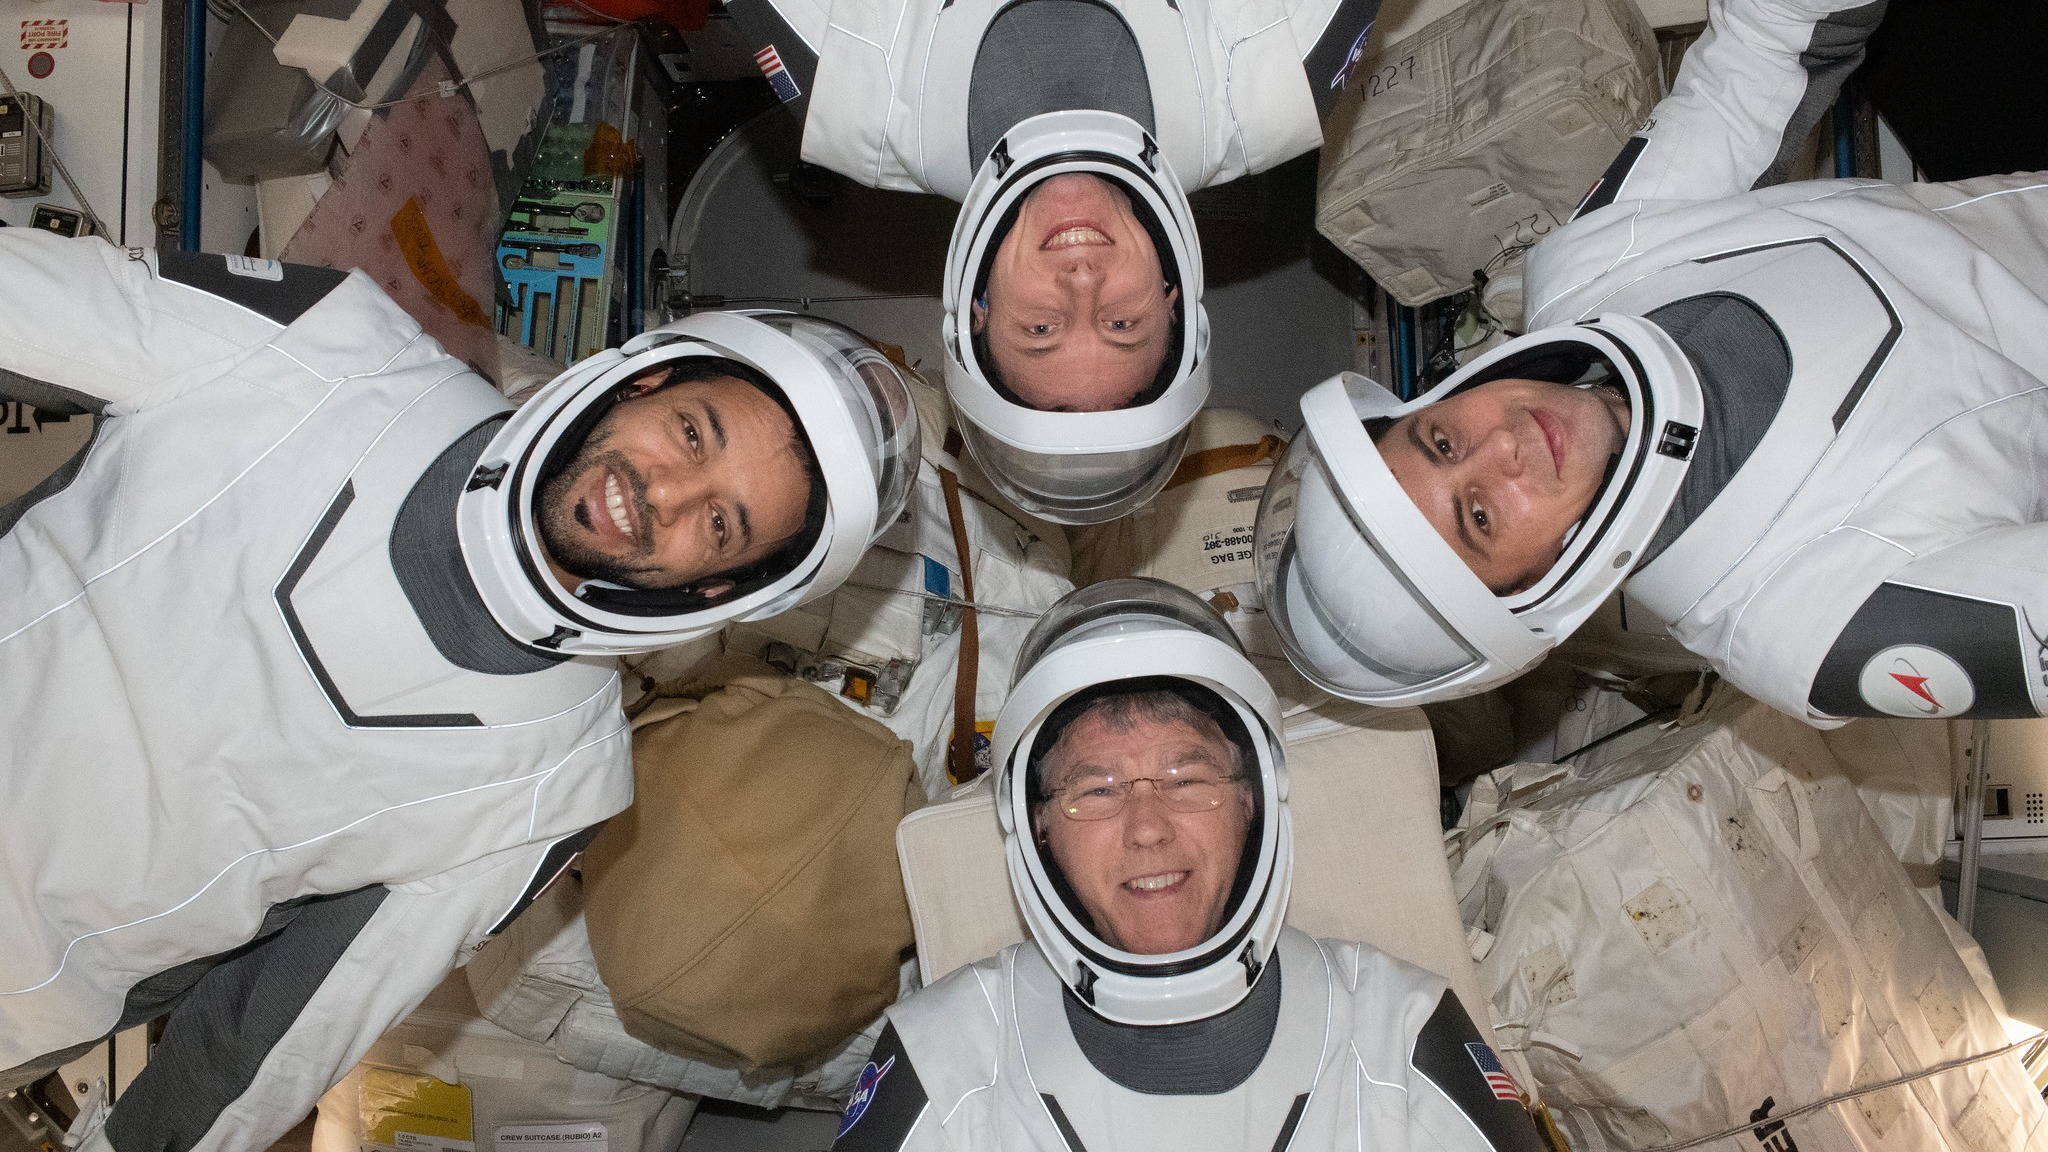 four astronauts floating in a space station module in spacesuits. they are visible face-up and each one of them is poised 90 degrees from each other, forming a circle